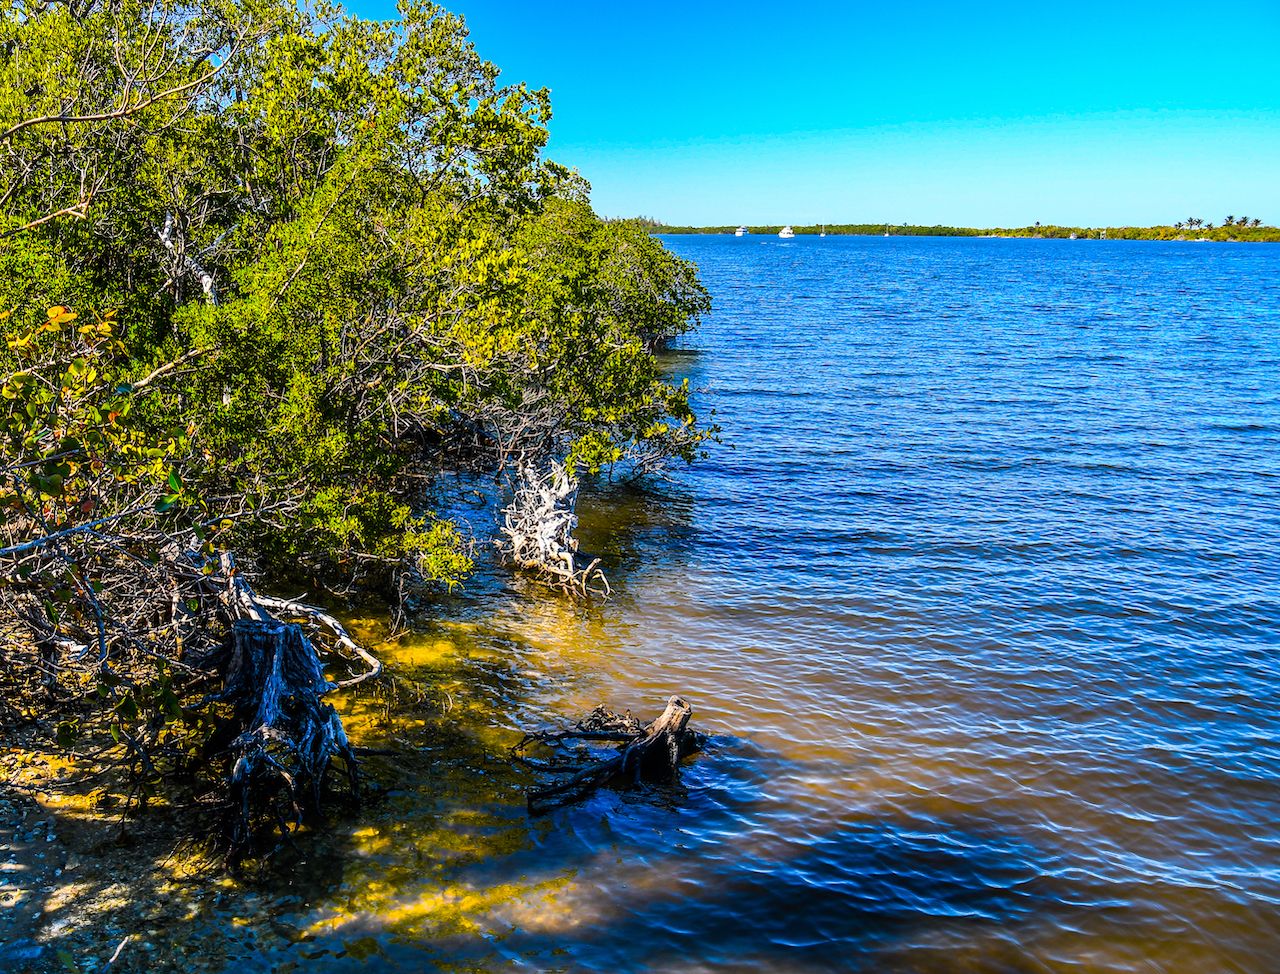 A view of Peck Lake in Hobe Sound, Florida